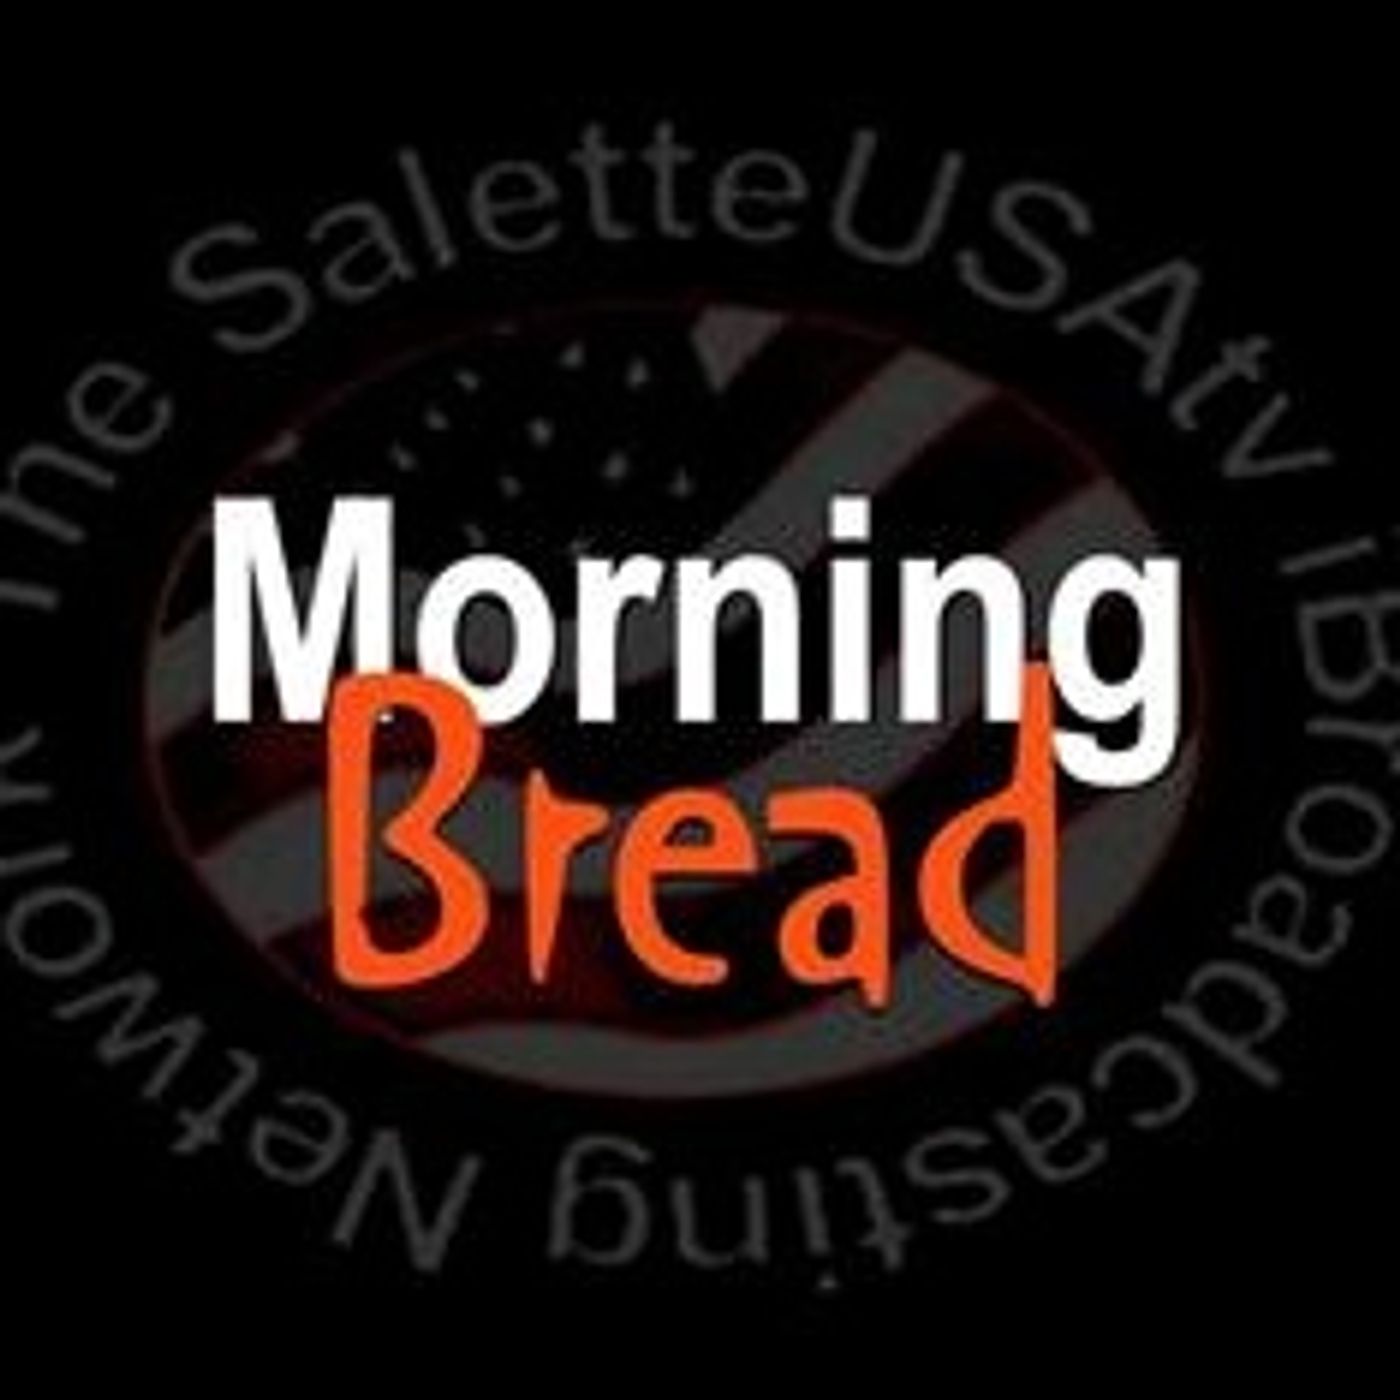 The Morning Bread Show